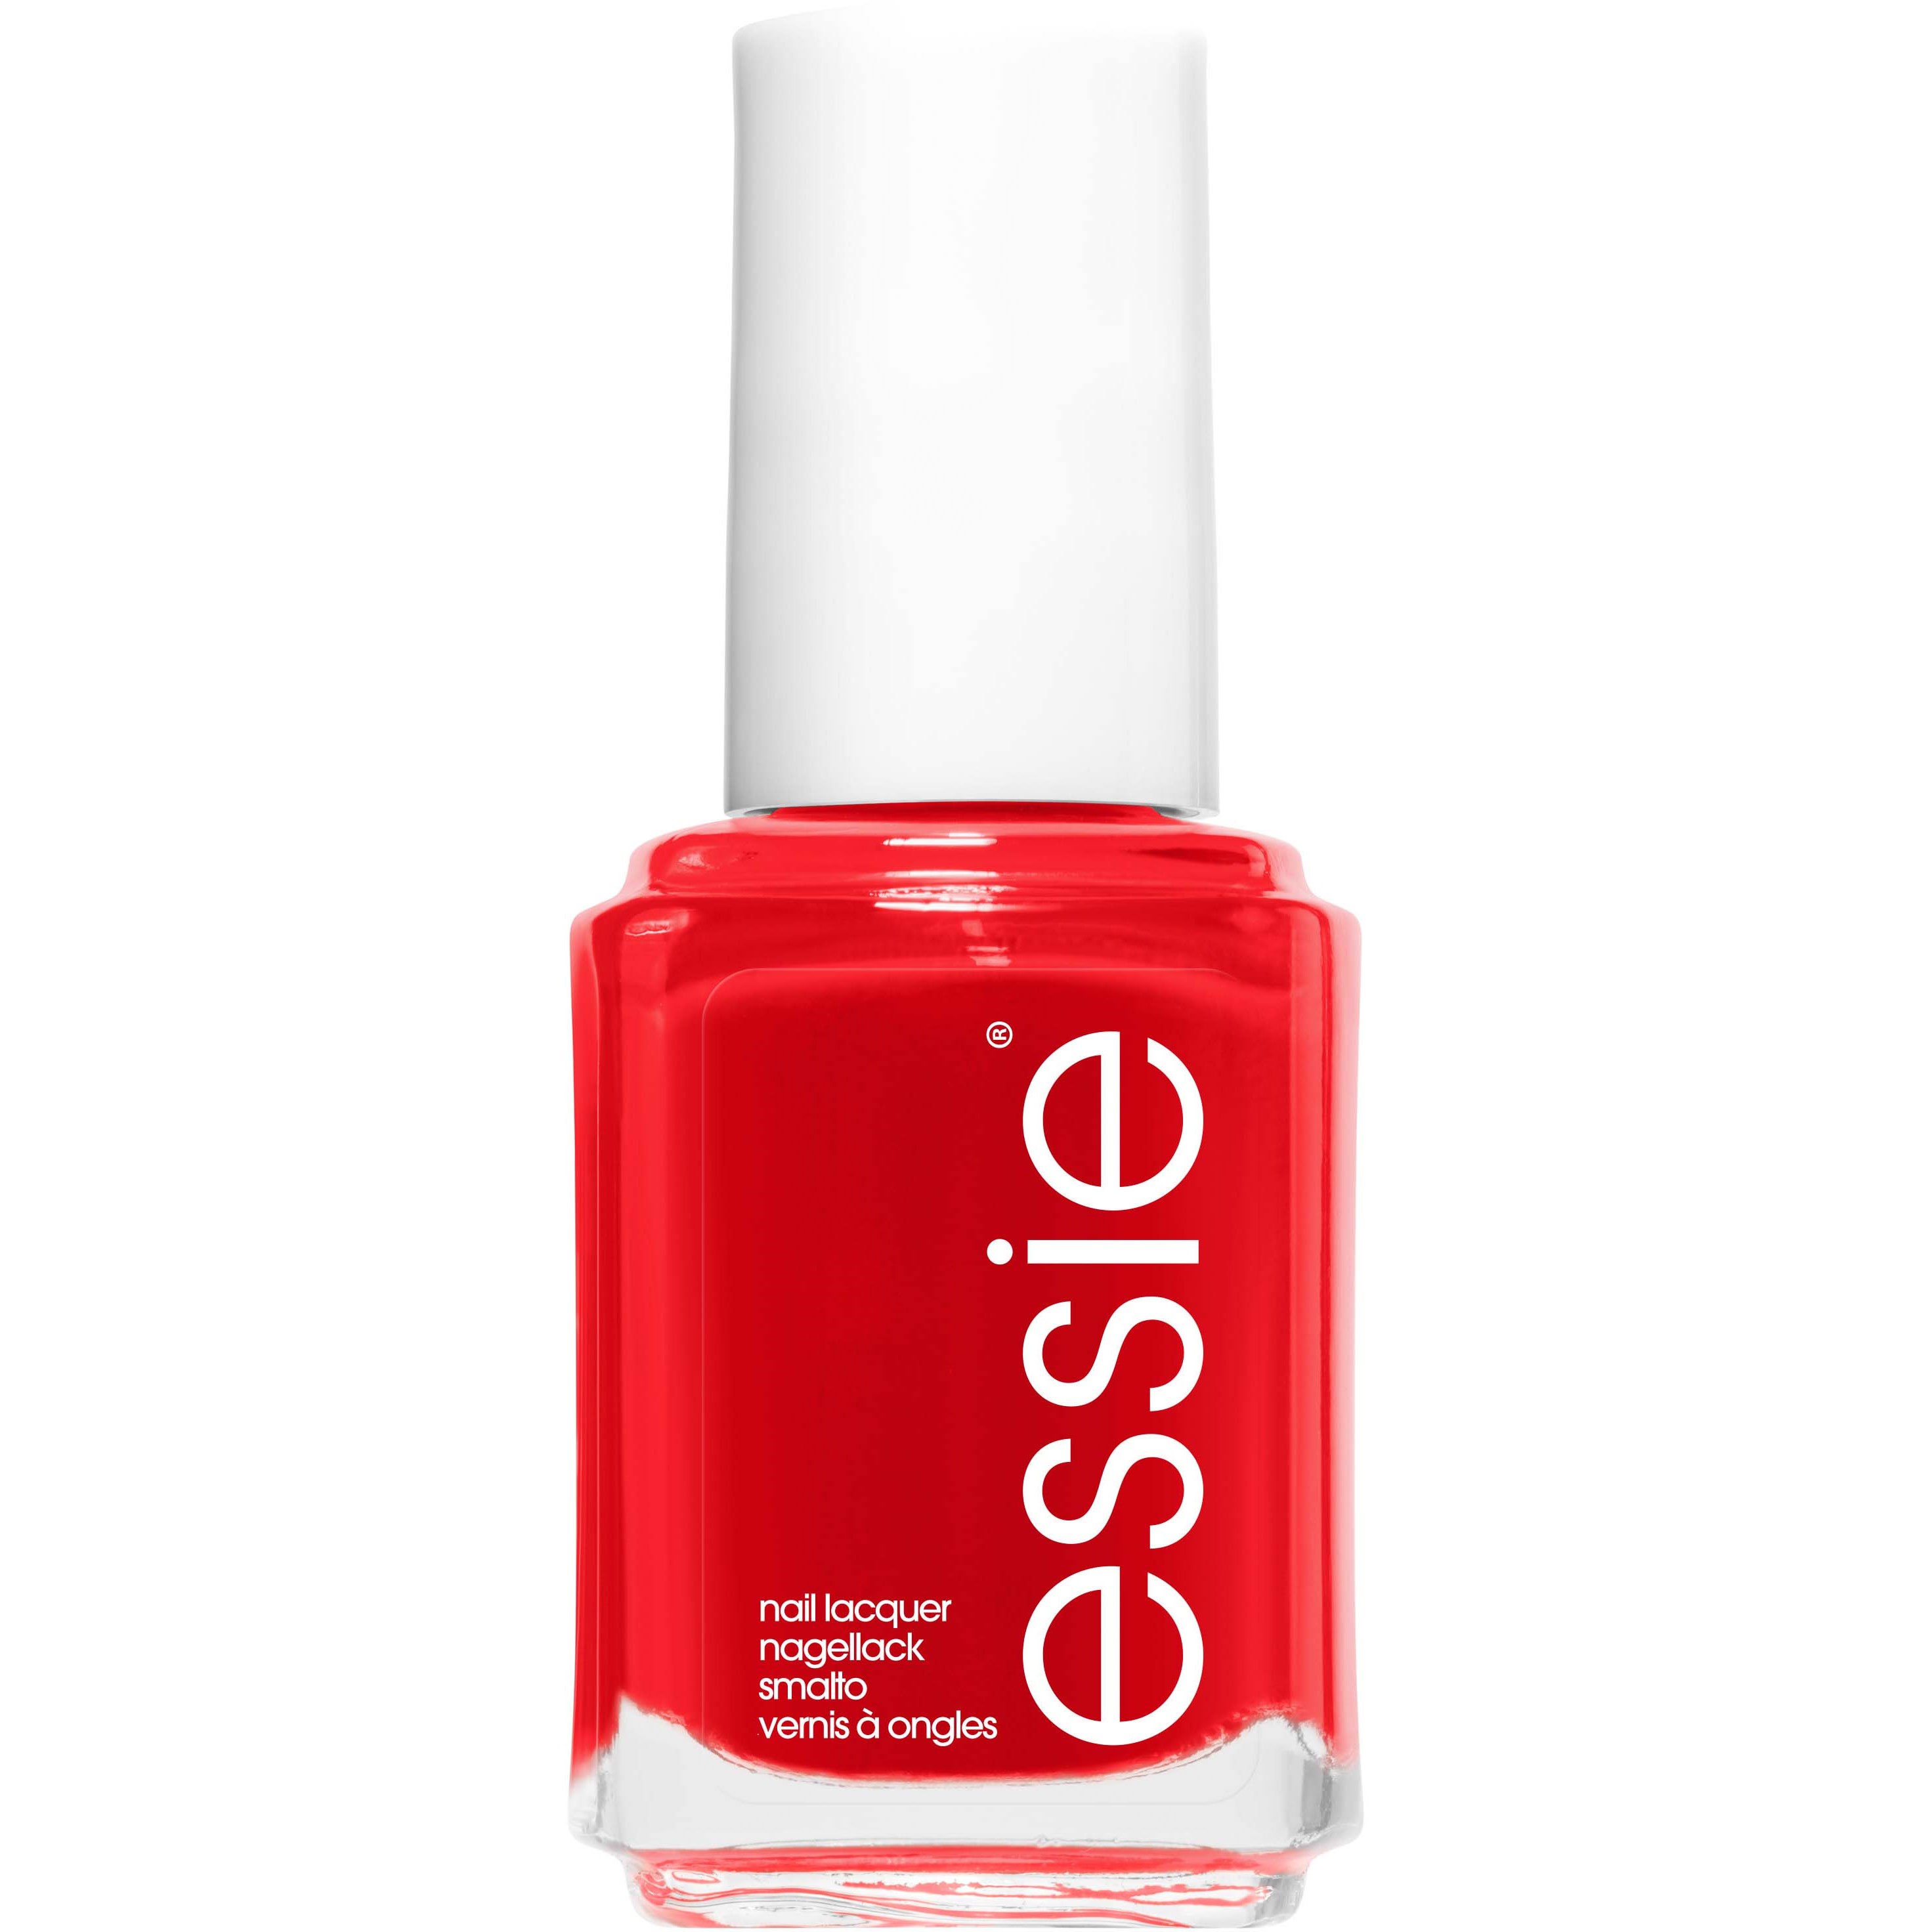 Bilde av Essie Summer Collection Nail Lacquer 62 Lacquered Up